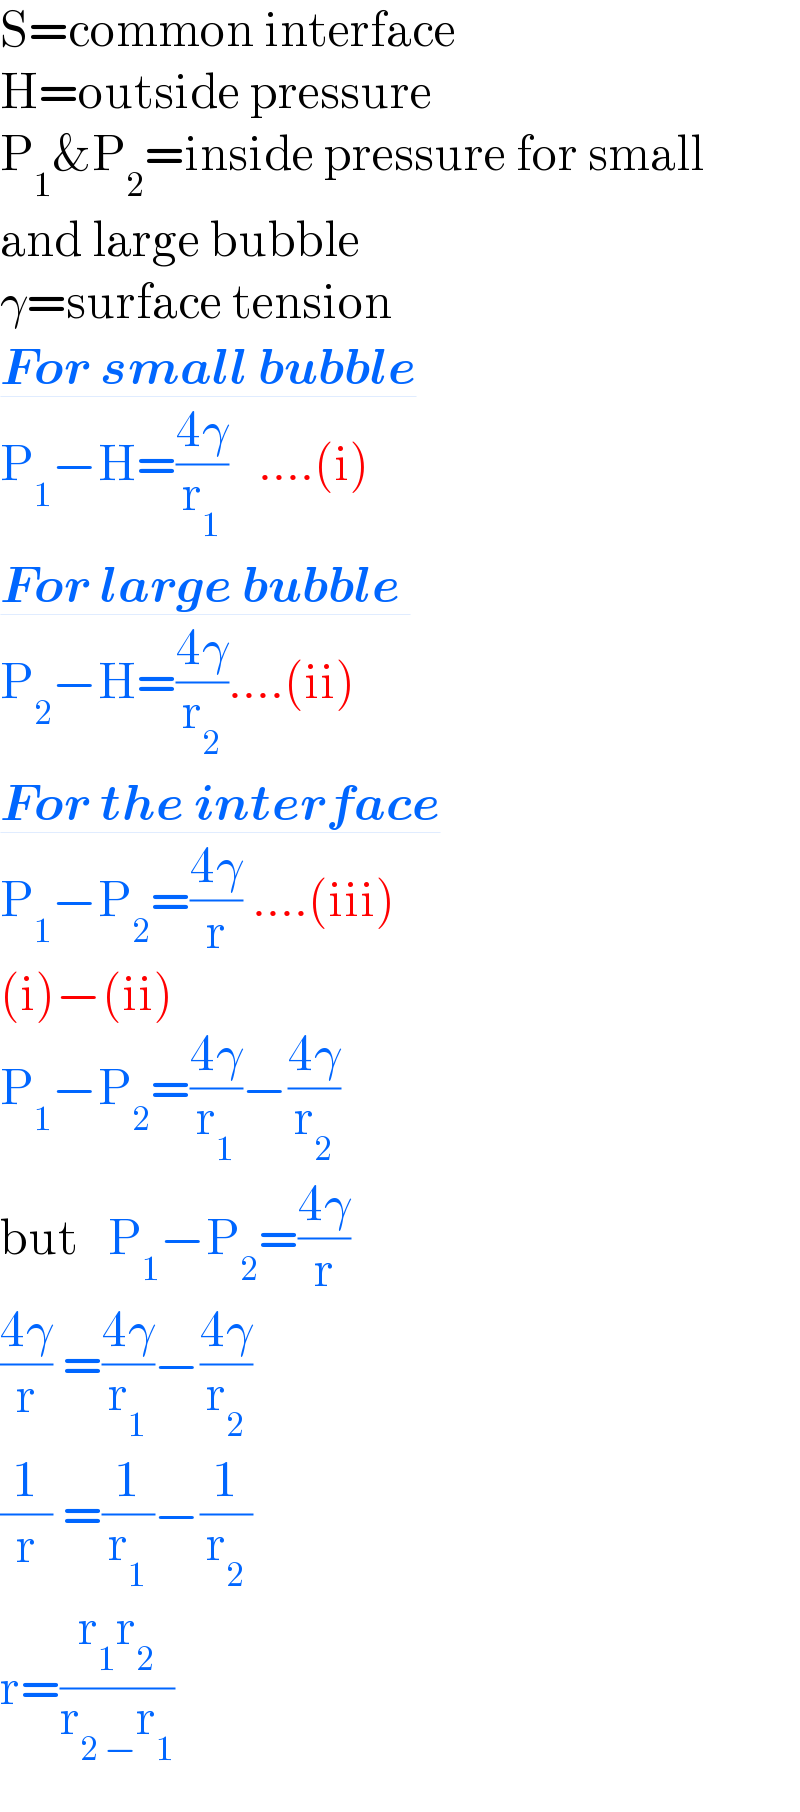 S=common interface  H=outside pressure  P_1 &P_2 =inside pressure for small  and large bubble  γ=surface tension  For small bubble  P_1 −H=((4γ)/r_1 )   ....(i)  For large bubble   P_2 −H=((4γ)/r_2 )....(ii)  For the interface  P_1 −P_2 =((4γ)/r) ....(iii)  (i)−(ii)  P_1 −P_2 =((4γ)/r_1 )−((4γ)/r_2 )  but   P_1 −P_2 =((4γ)/r)   ((4γ)/r) =((4γ)/r_1 )−((4γ)/r_2 )  (1/r) =(1/r_1 )−(1/r_2 )  r=((r_1 r_2 )/(r_(2 −) r_1 ))  